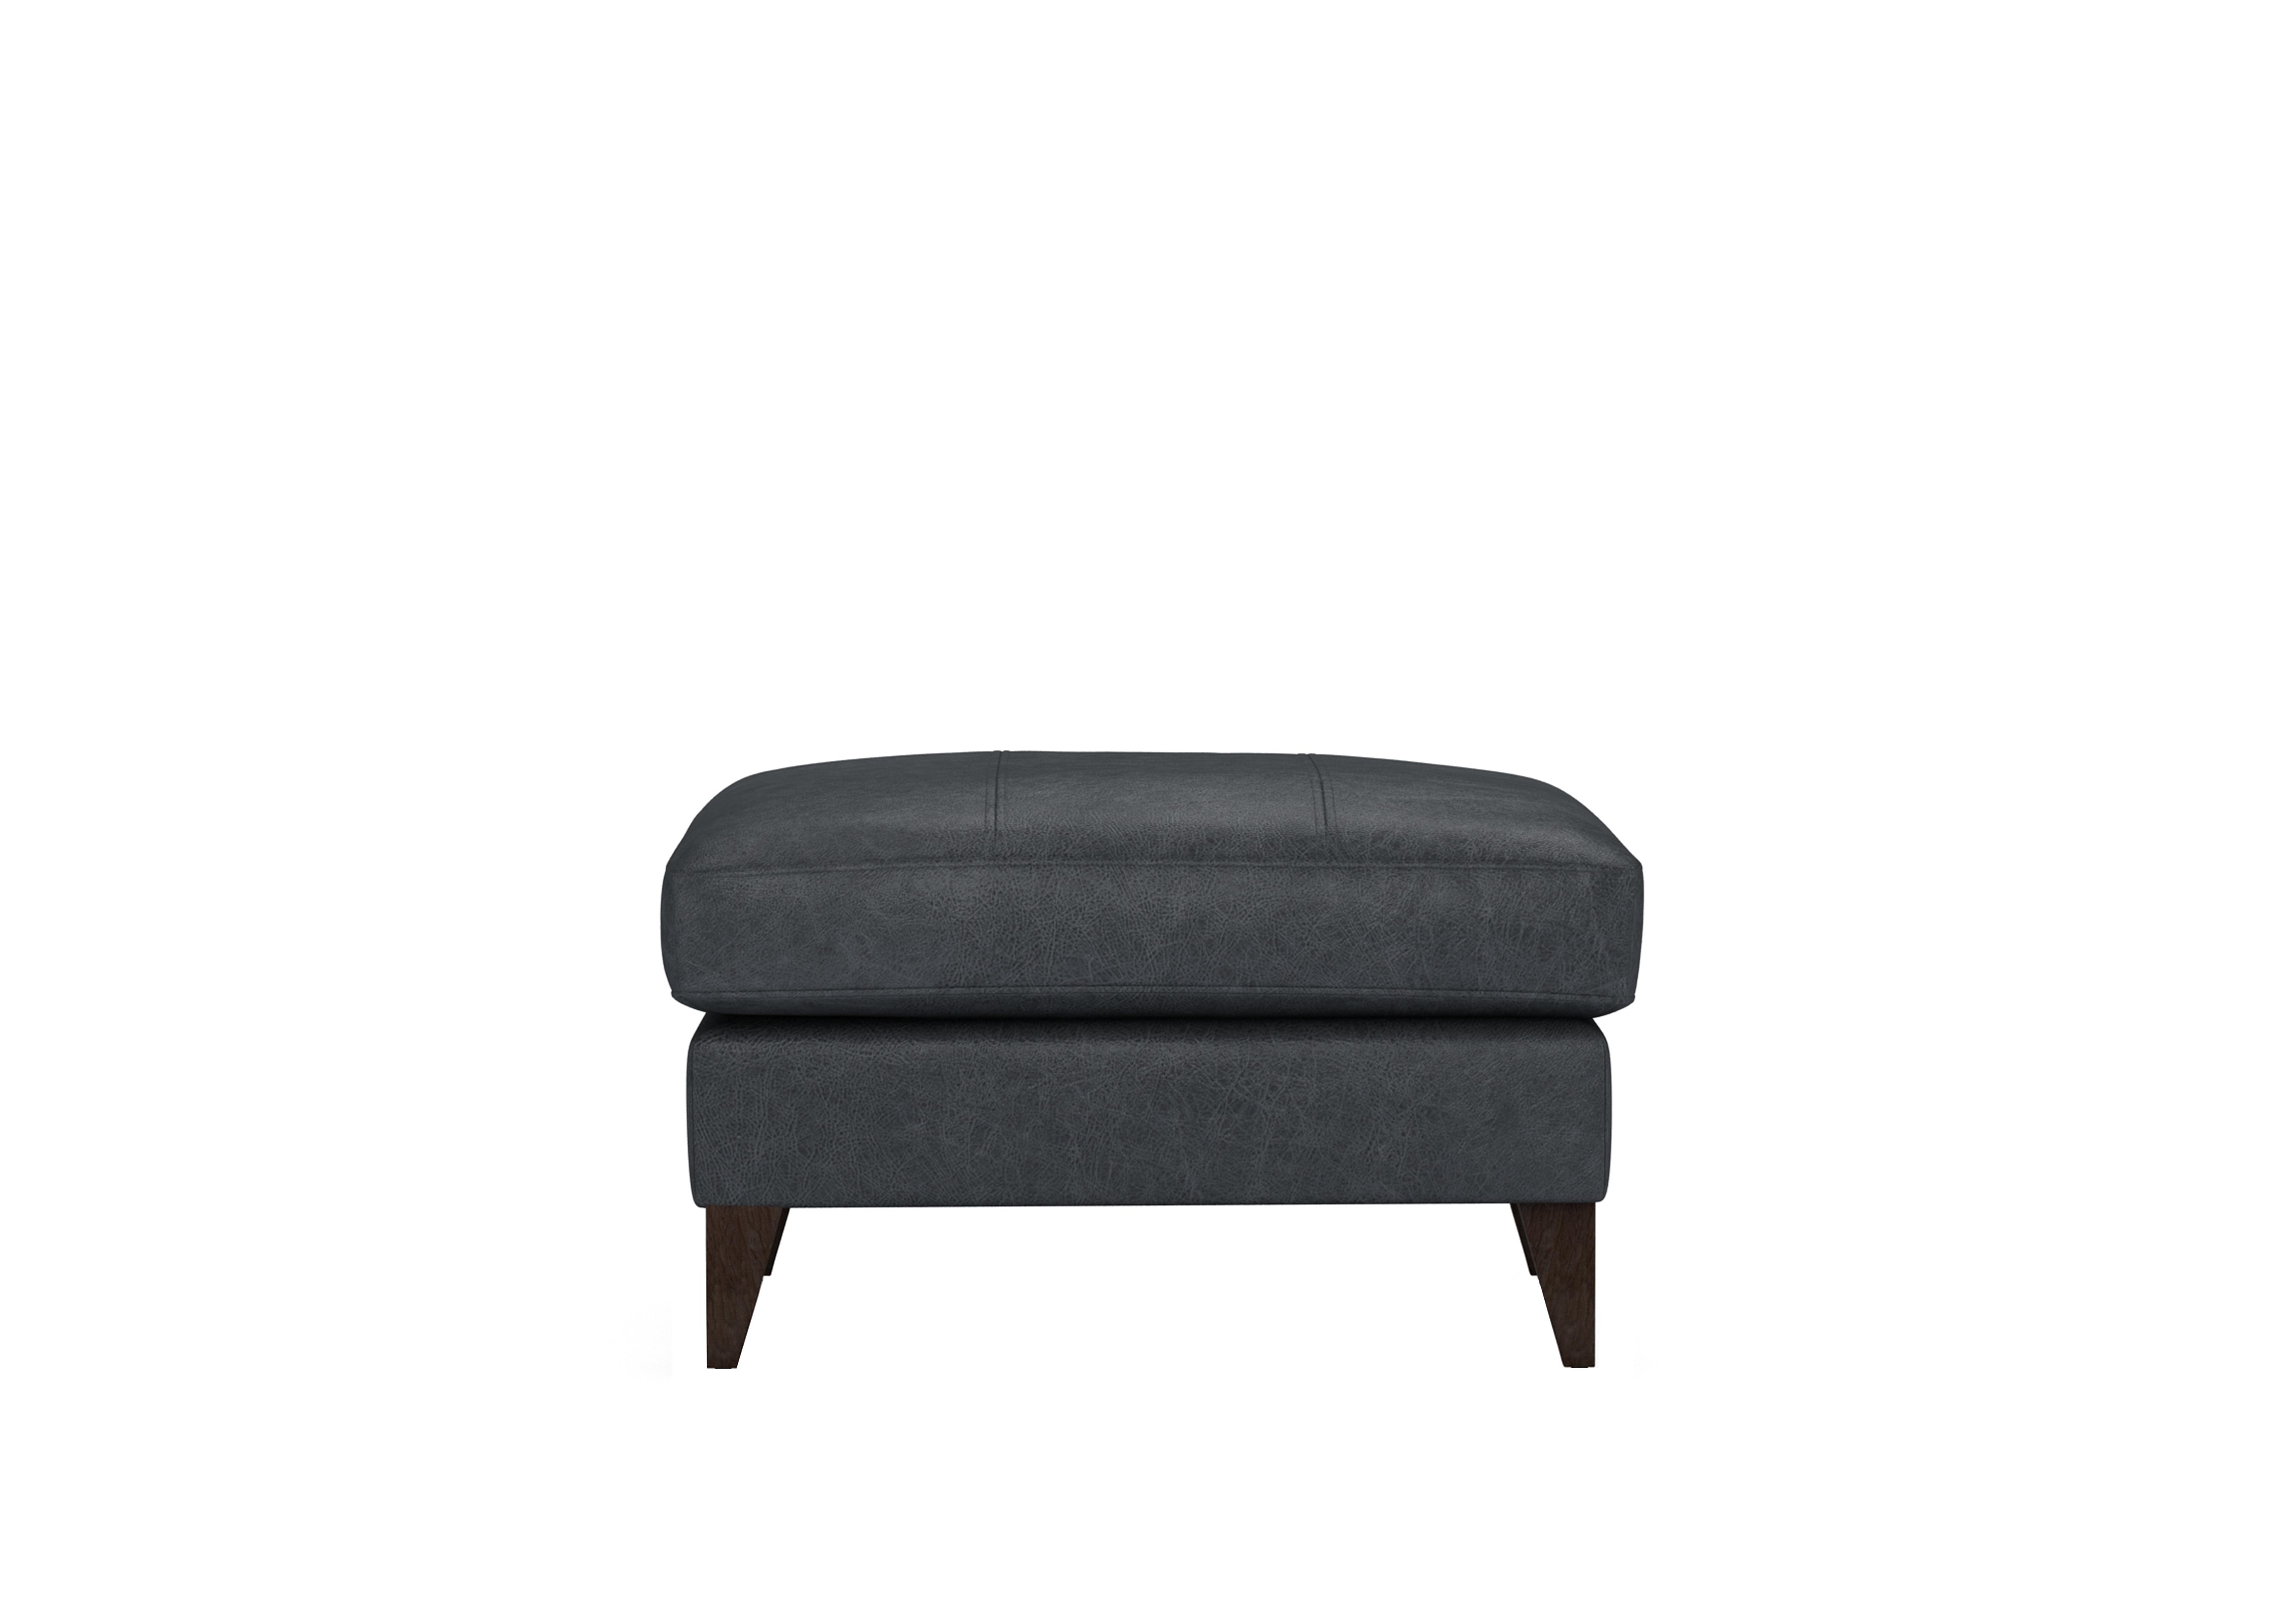 Romilly Leather Footstool in Sha188 Shadow Wa Ft on Furniture Village